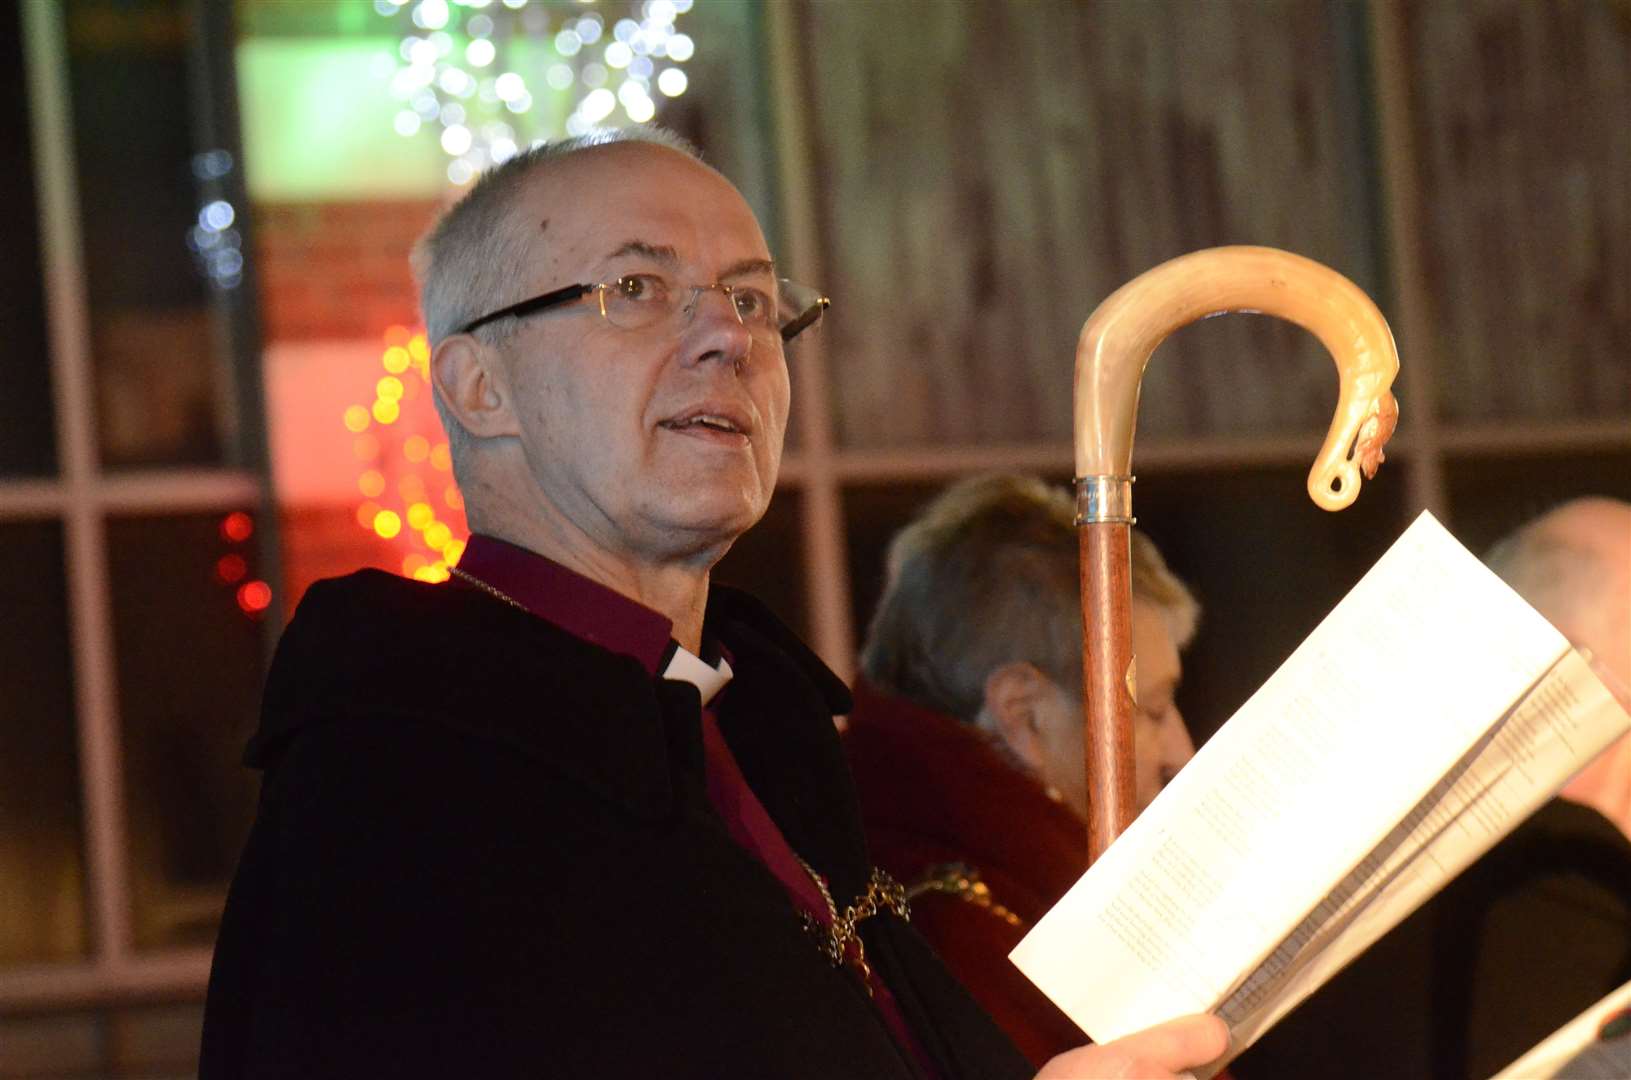 Archbishop Justin Welby has delivered his Christmas message